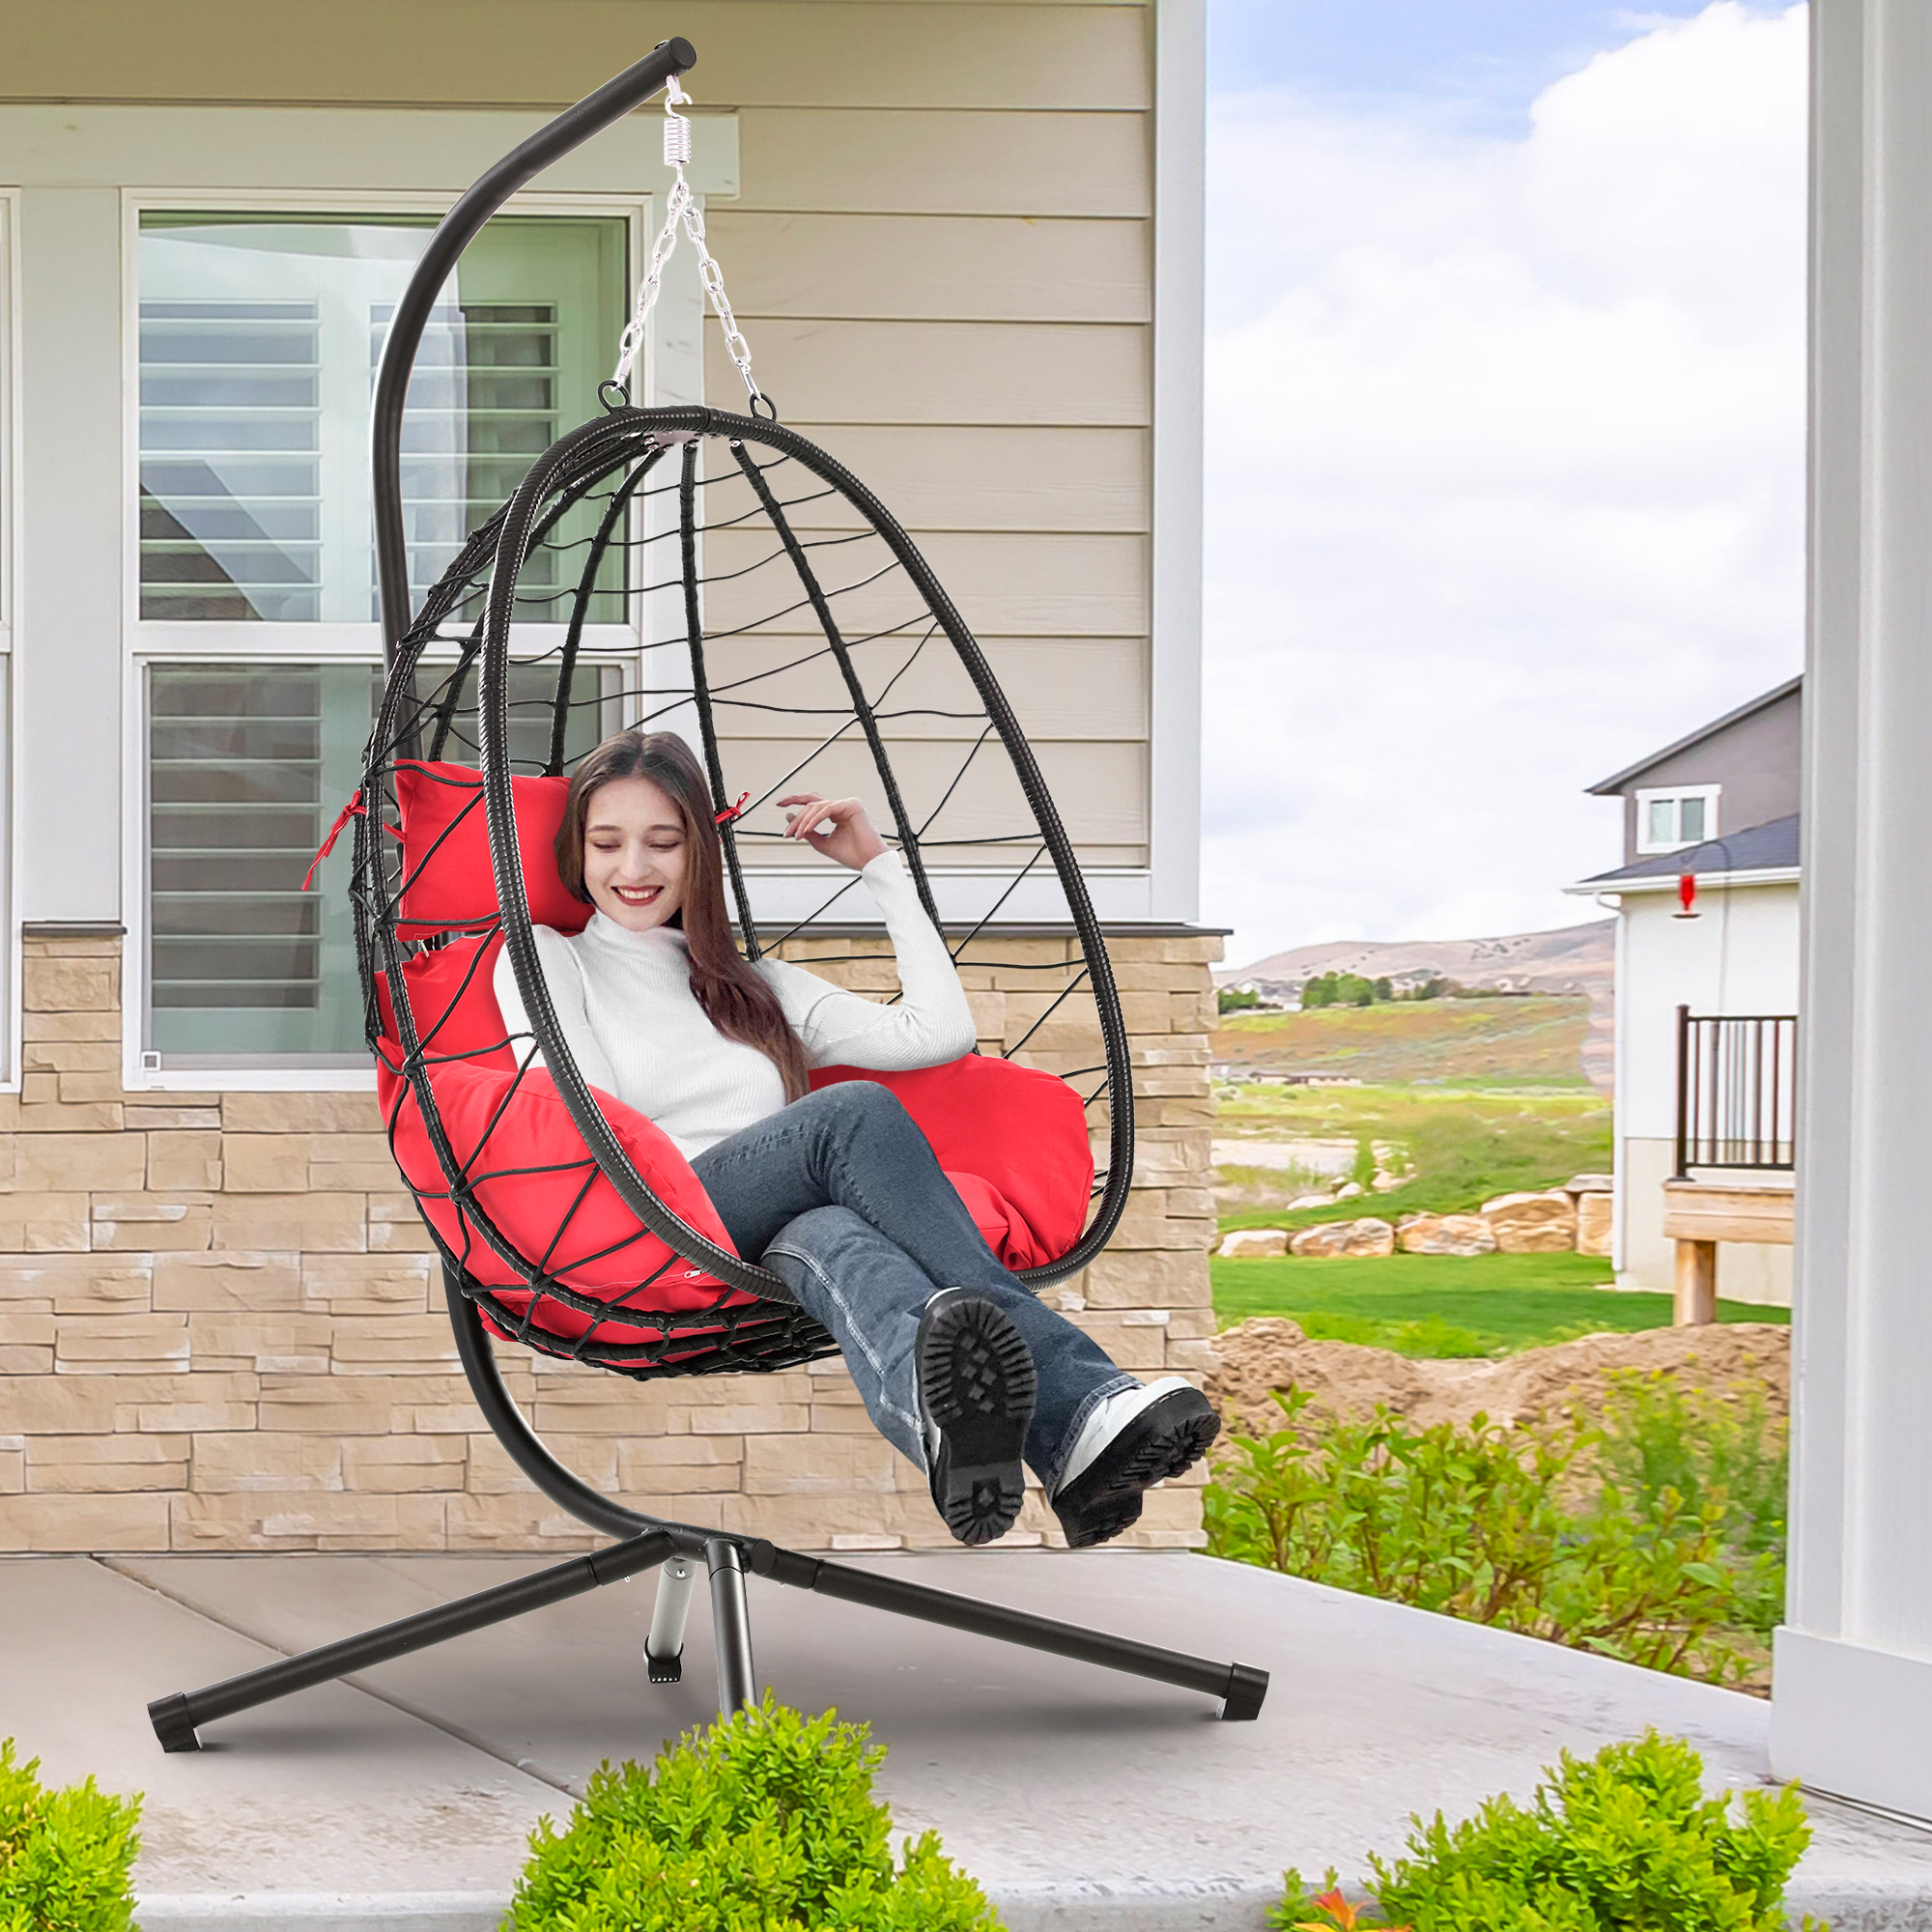 Egg Chair, Indoor Outdoor Patio Wicker Hanging Chair with Stand, Hanging Swing Chair w/ Cushion, Durable All-Weather UV Rattan Lounge Chair for Bedroom, Patio, Deck, Yard, Garden, 350lbs, Red, SS1953 - image 1 of 9